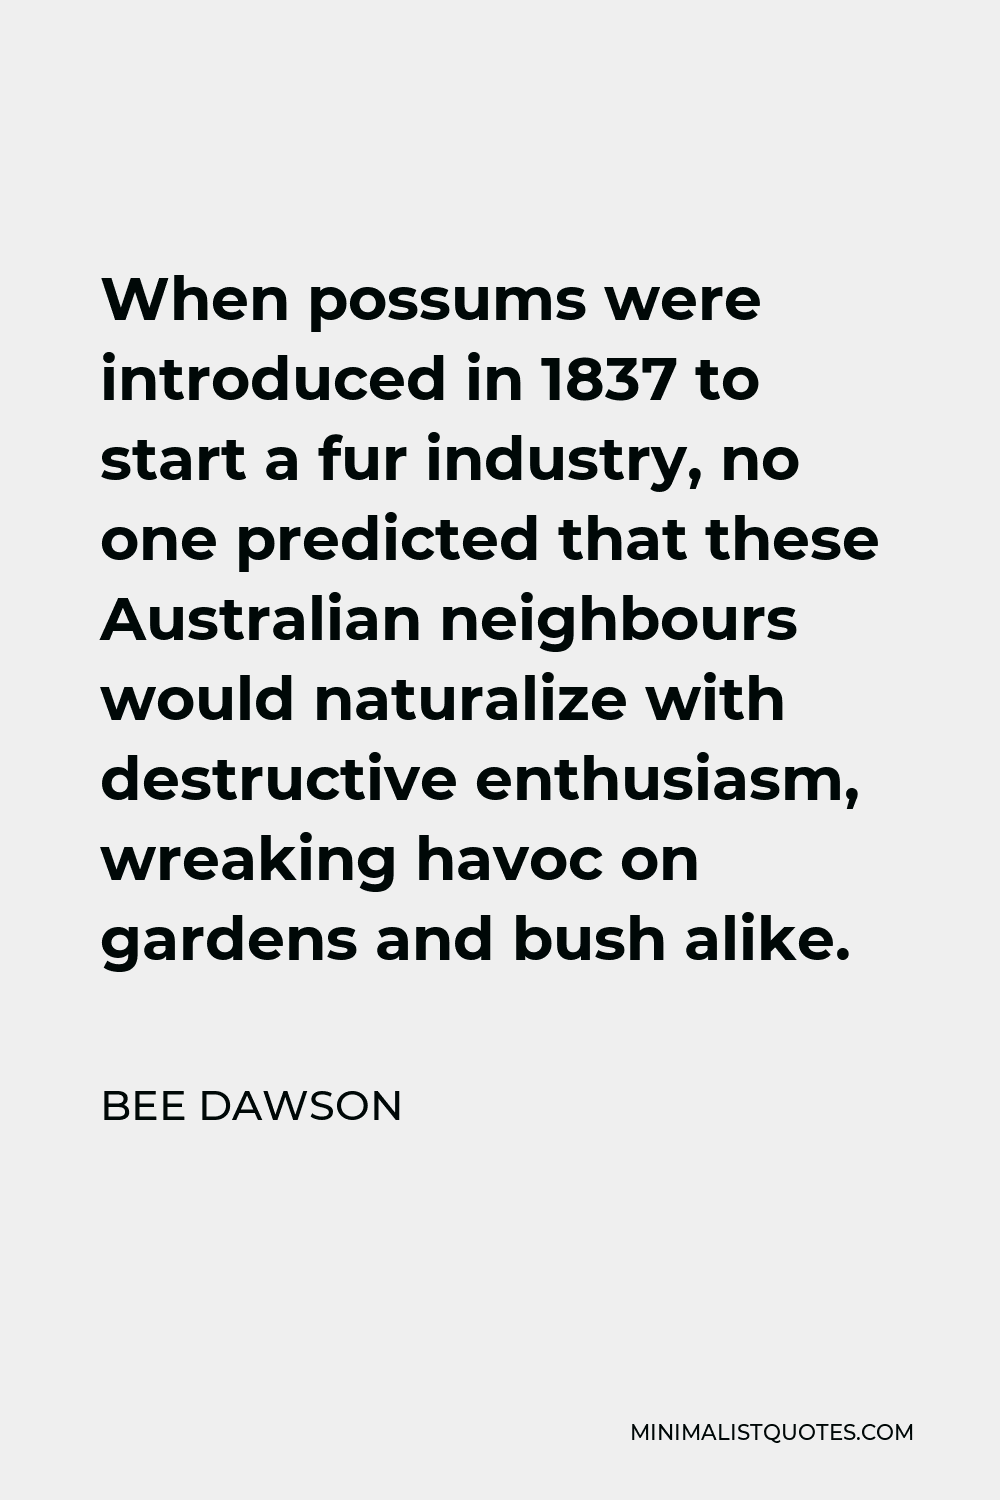 Bee Dawson Quote - When possums were introduced in 1837 to start a fur industry, no one predicted that these Australian neighbours would naturalize with destructive enthusiasm, wreaking havoc on gardens and bush alike.